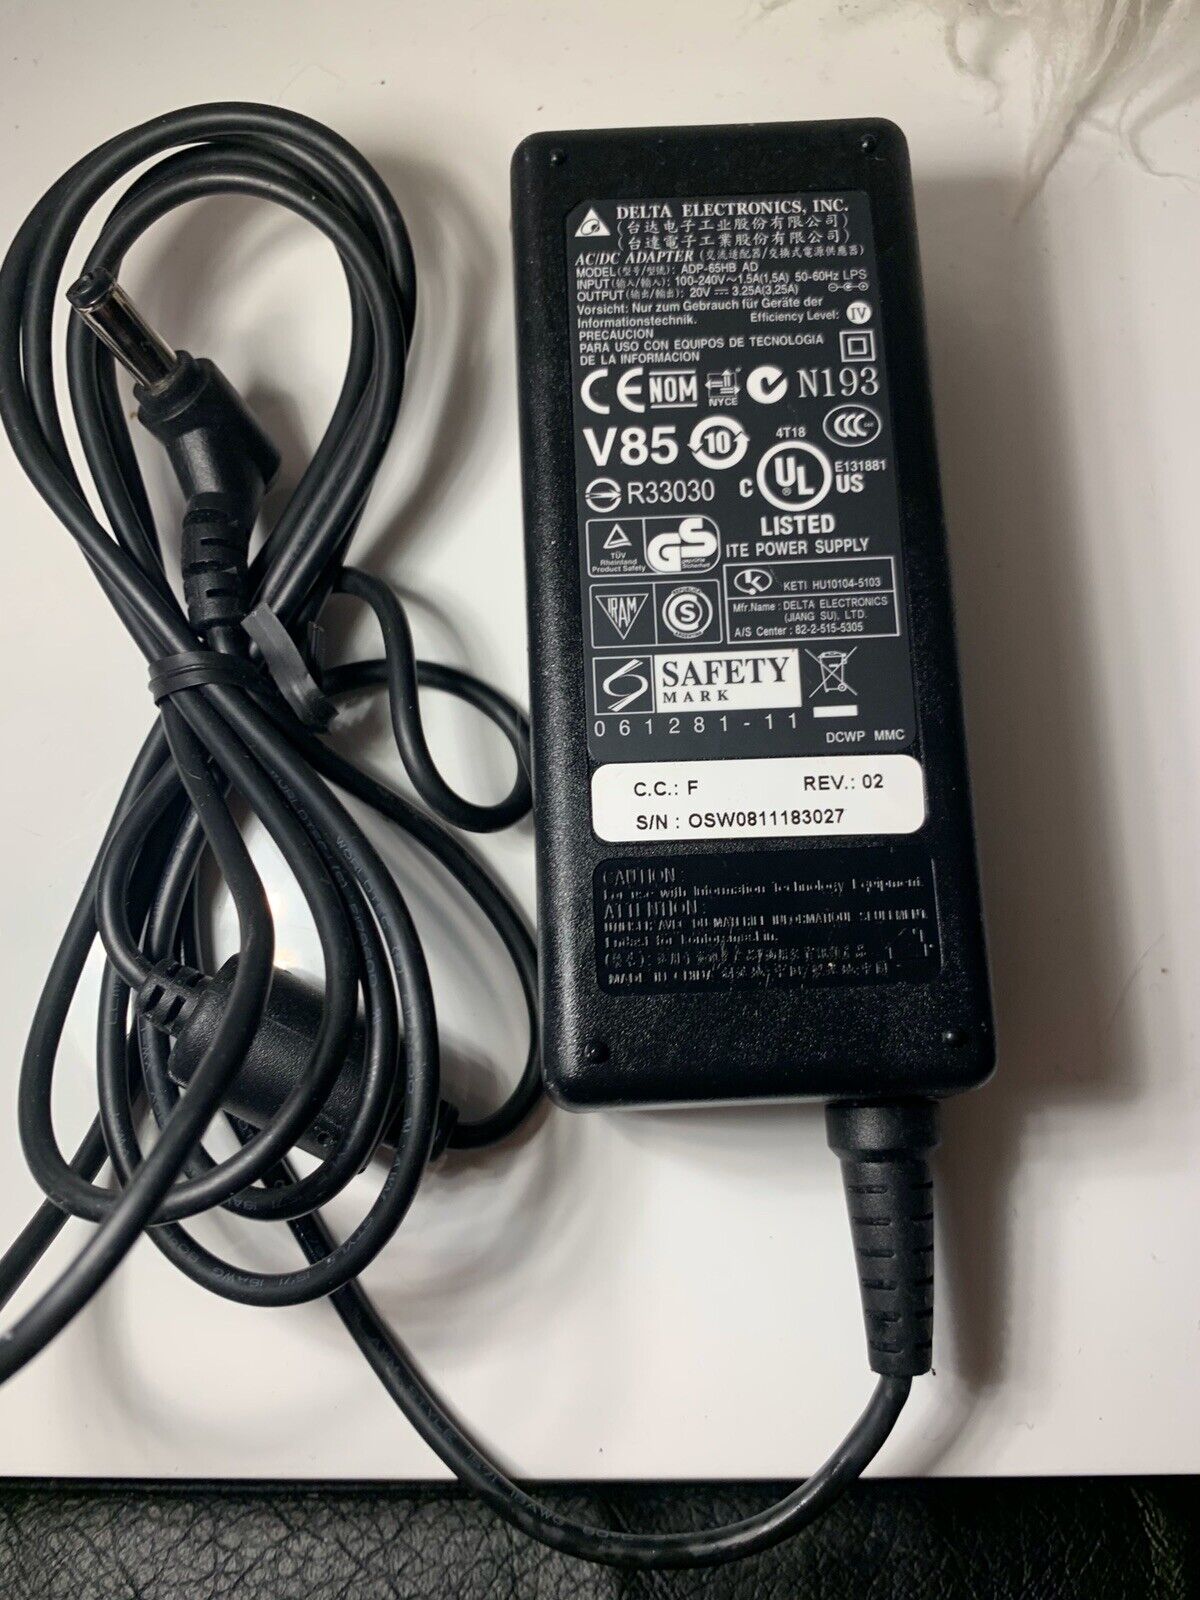 *Brand NEW* Delta Electronics ADP-65HB AD 20V 3.25A AC Adapter POWER Supply